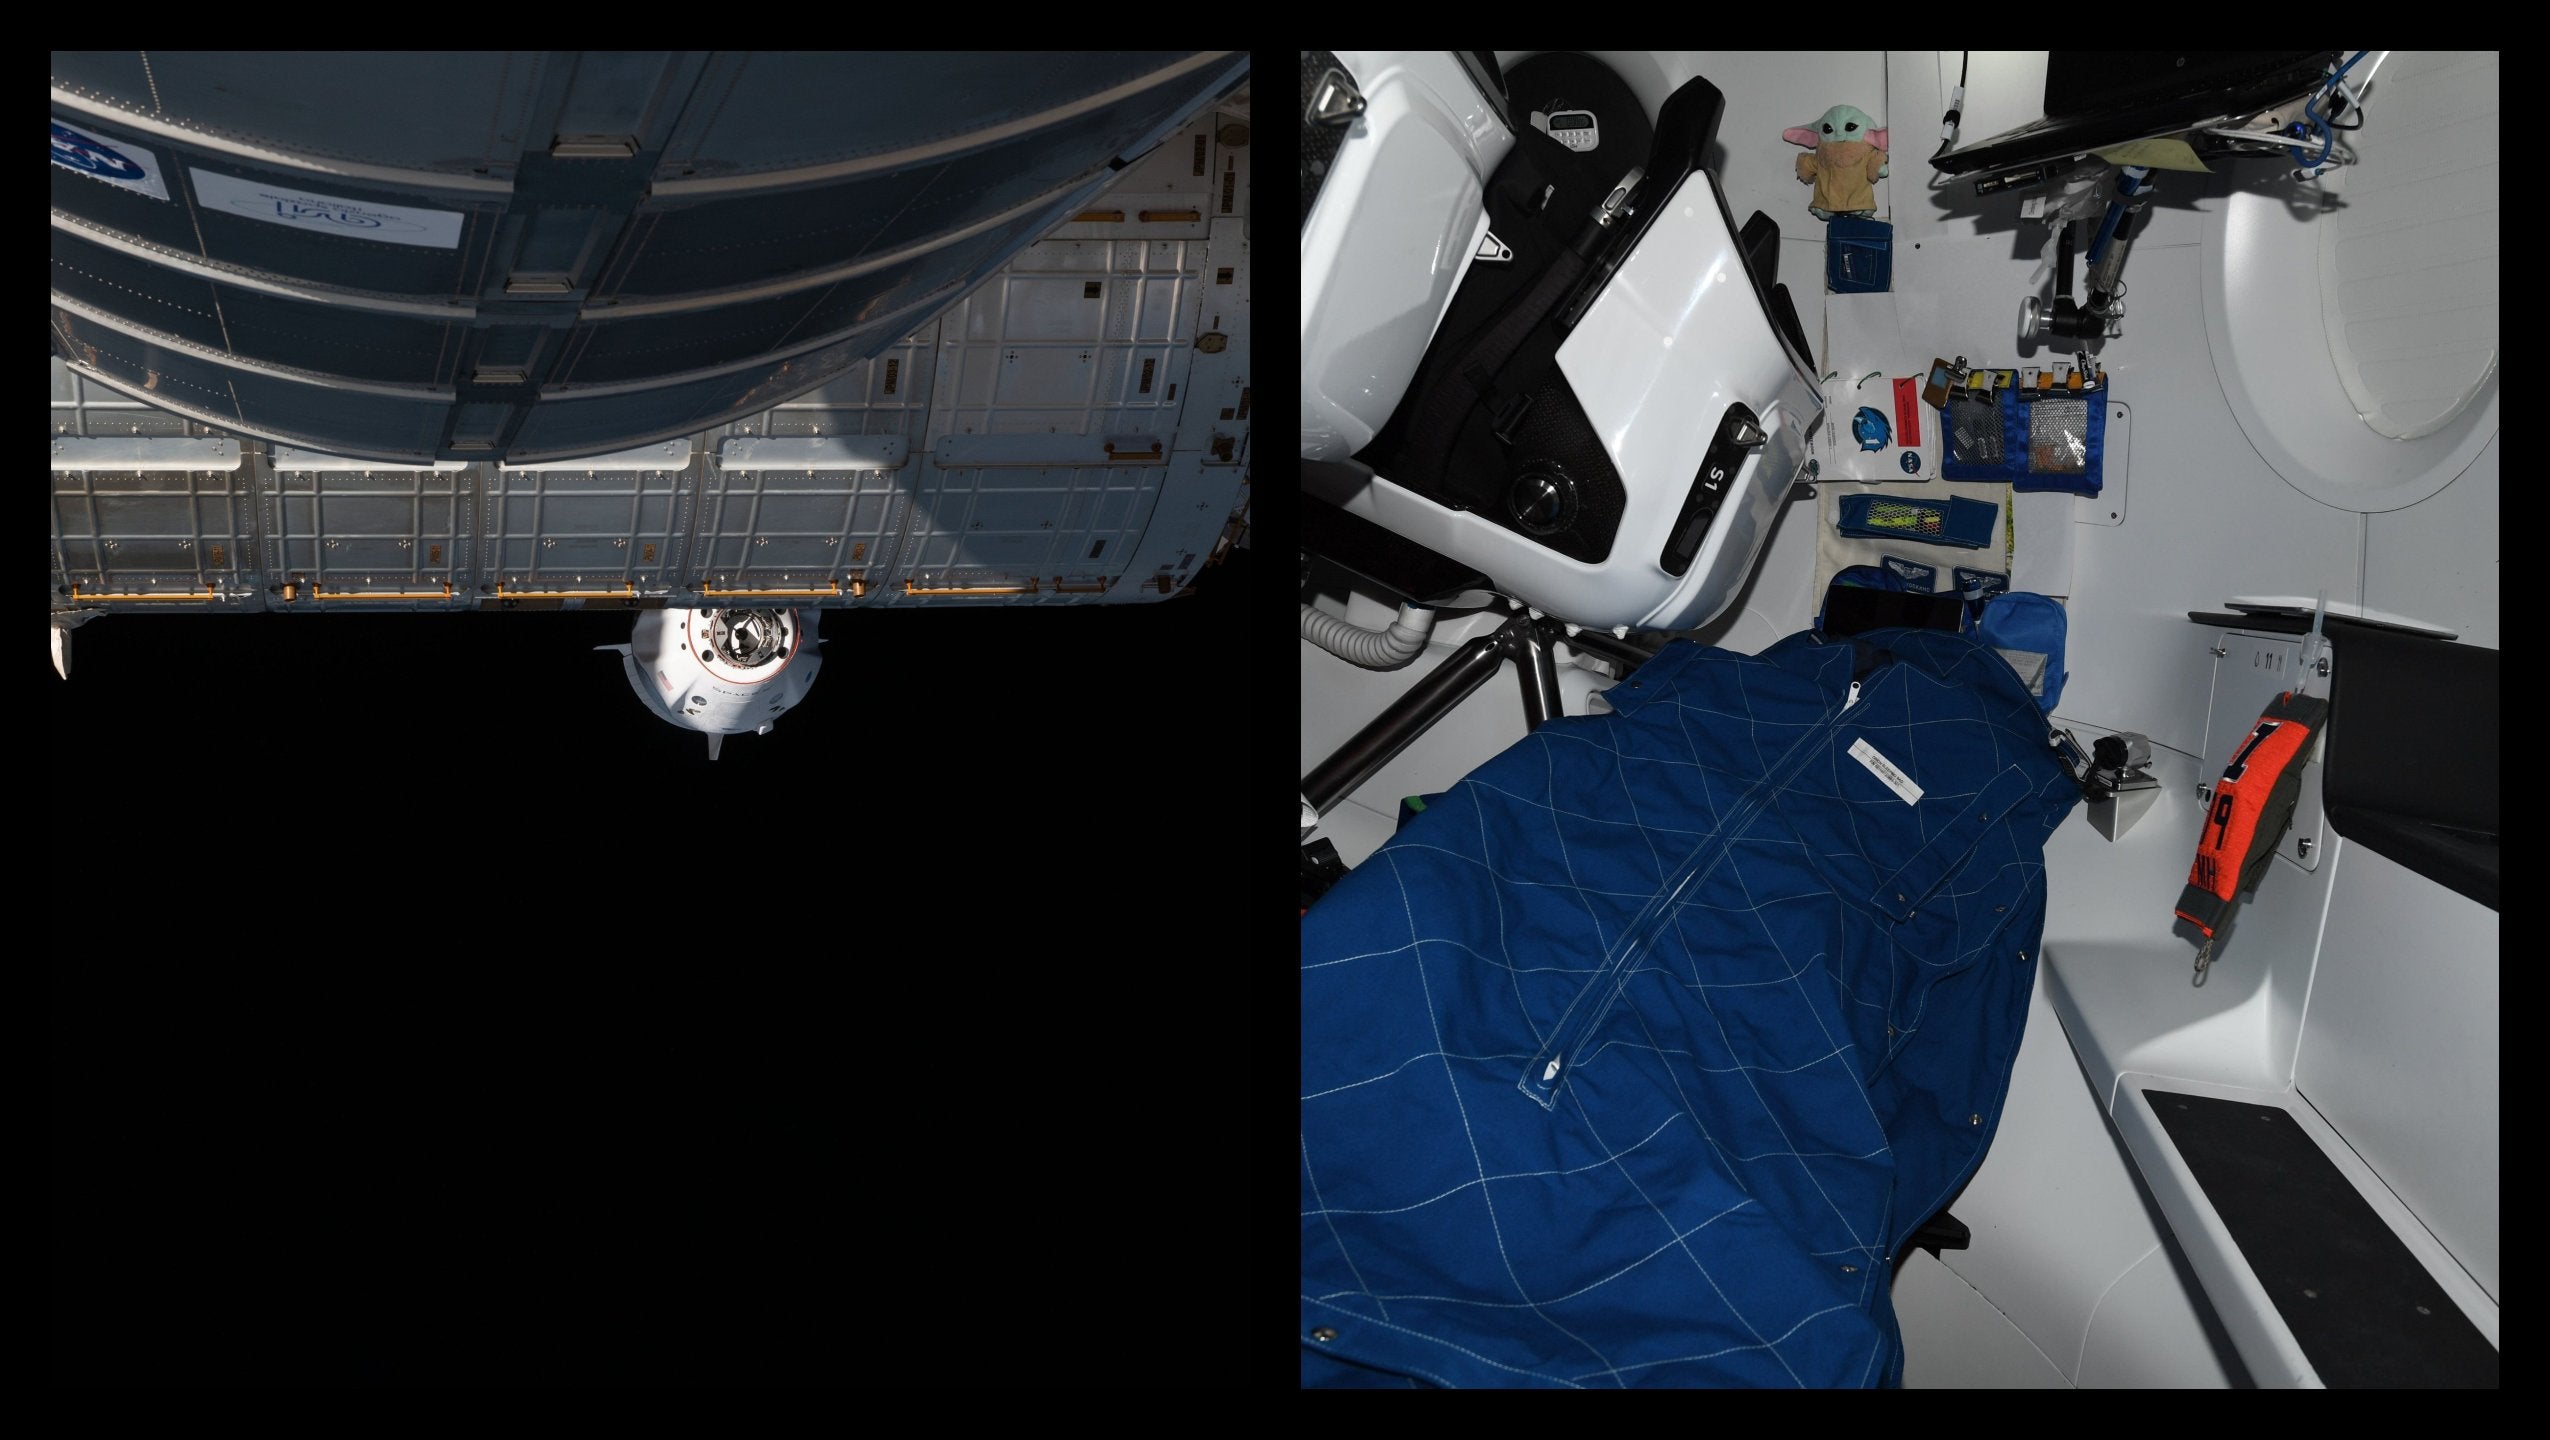 NASA Astronaut is sleeping in the cockpit of SpaceX's Crew Dragon spacecraft